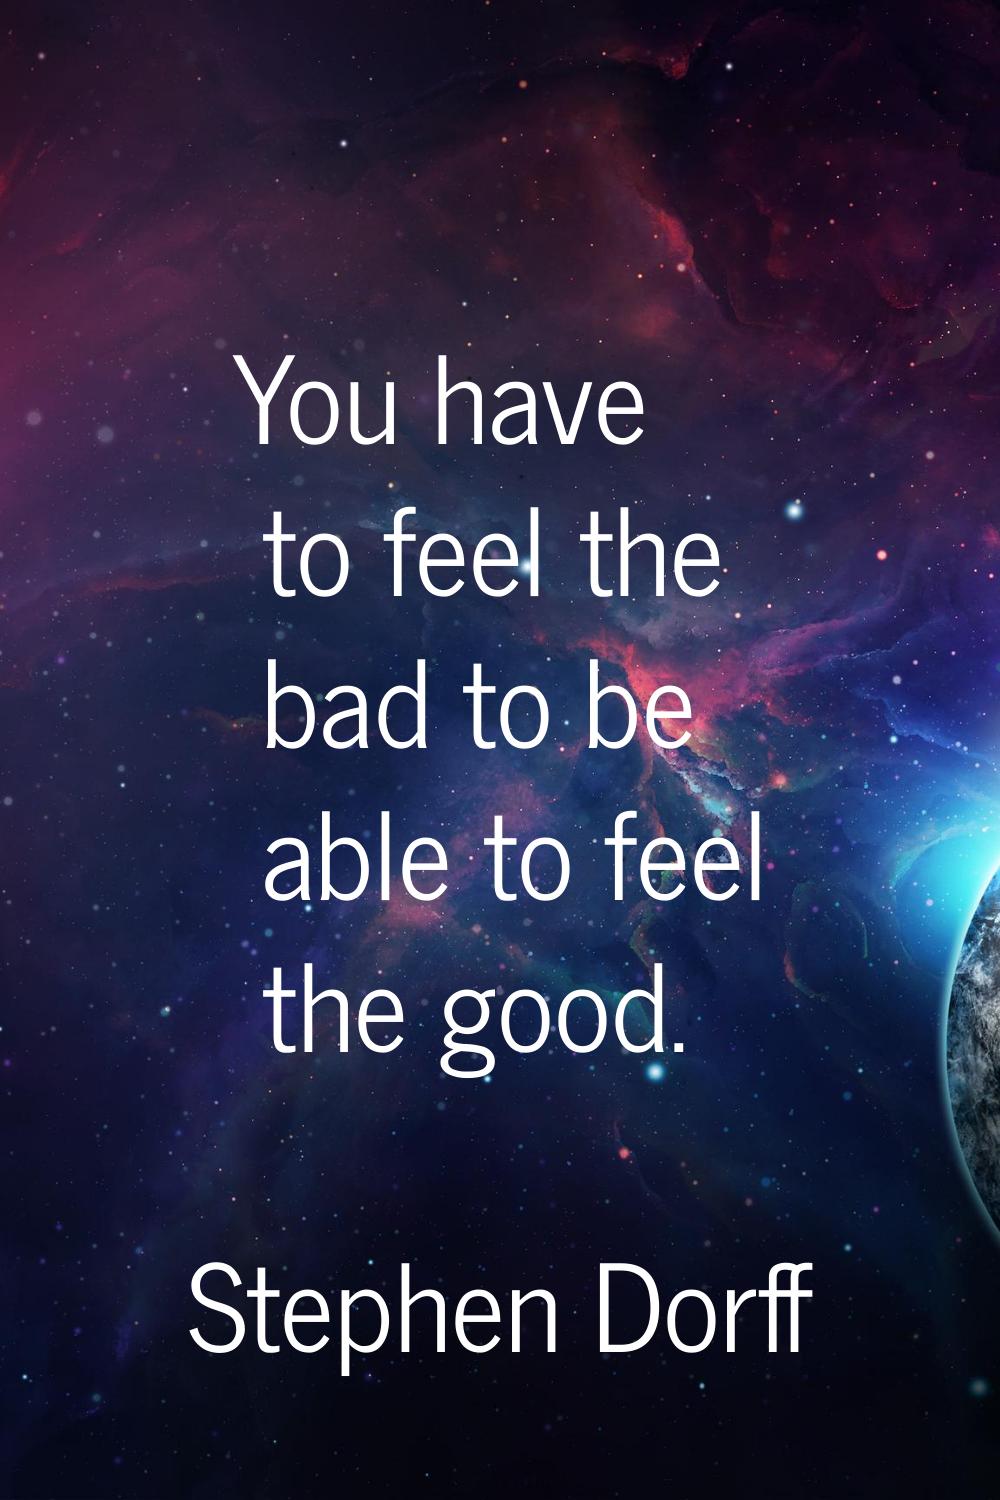 You have to feel the bad to be able to feel the good.